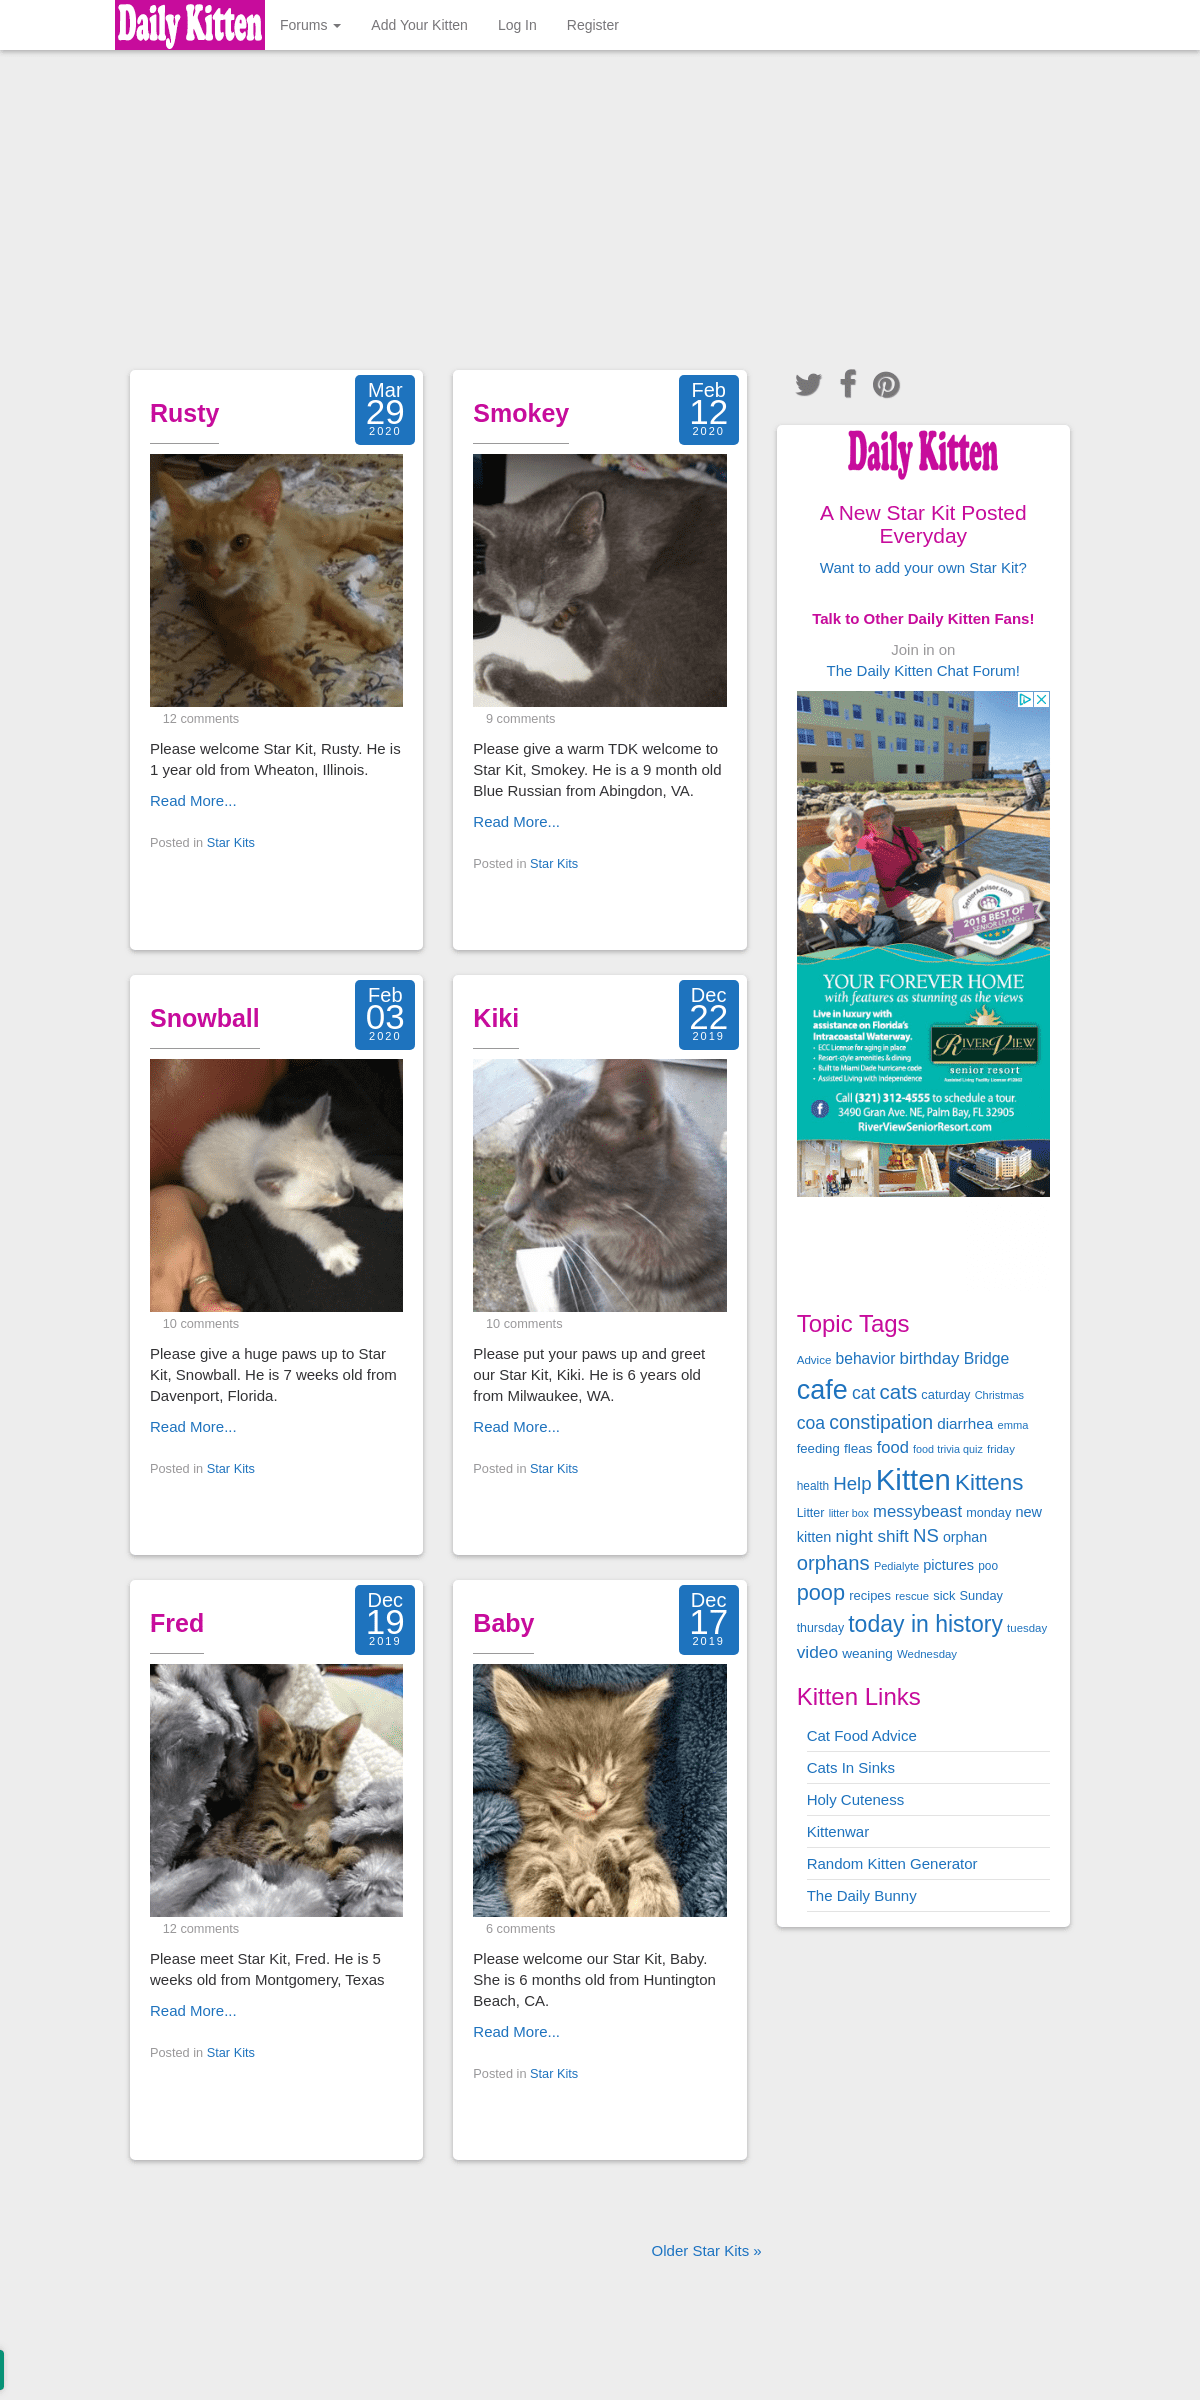 A complete backup of dailykitten.com